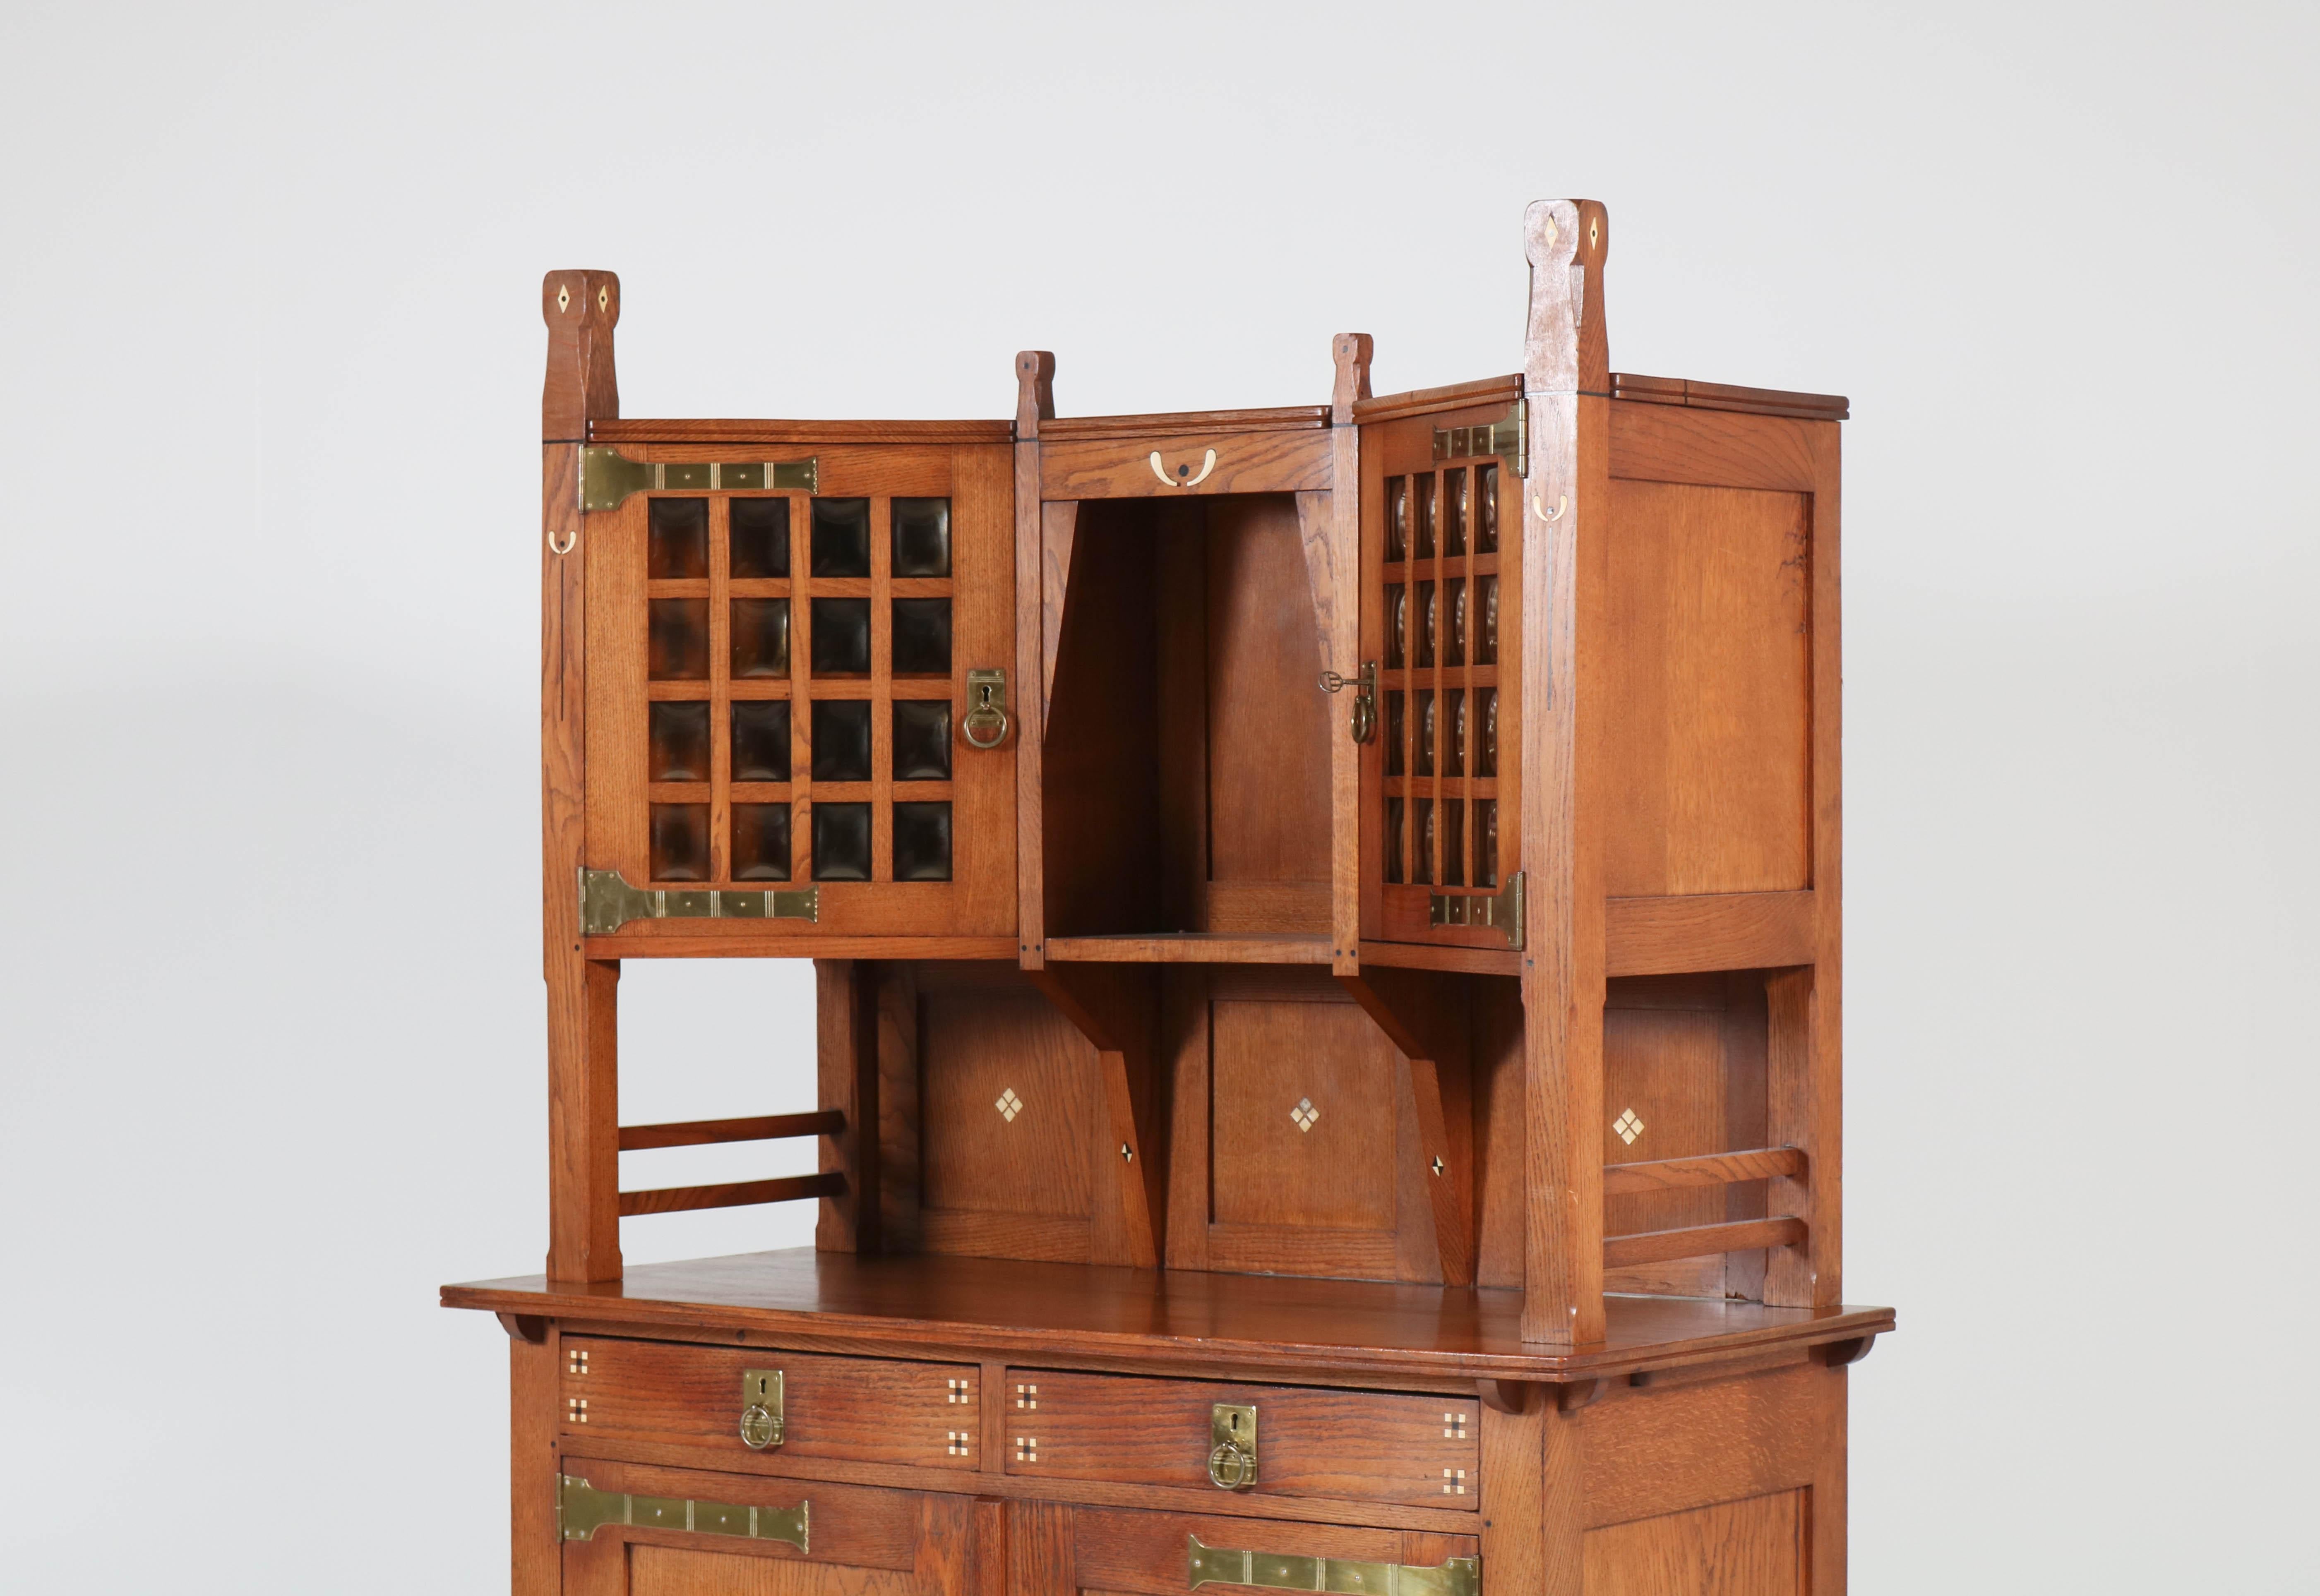 Stunning Art Nouveau Arts & Crafts sideboard.
Attributed to Onder den Sint-Maarten
Striking Dutch design from the 1900s.
Solid oak with original brass hinges and inlay.
Original and wonderful shaped glass in the two doors on the top piece.
In